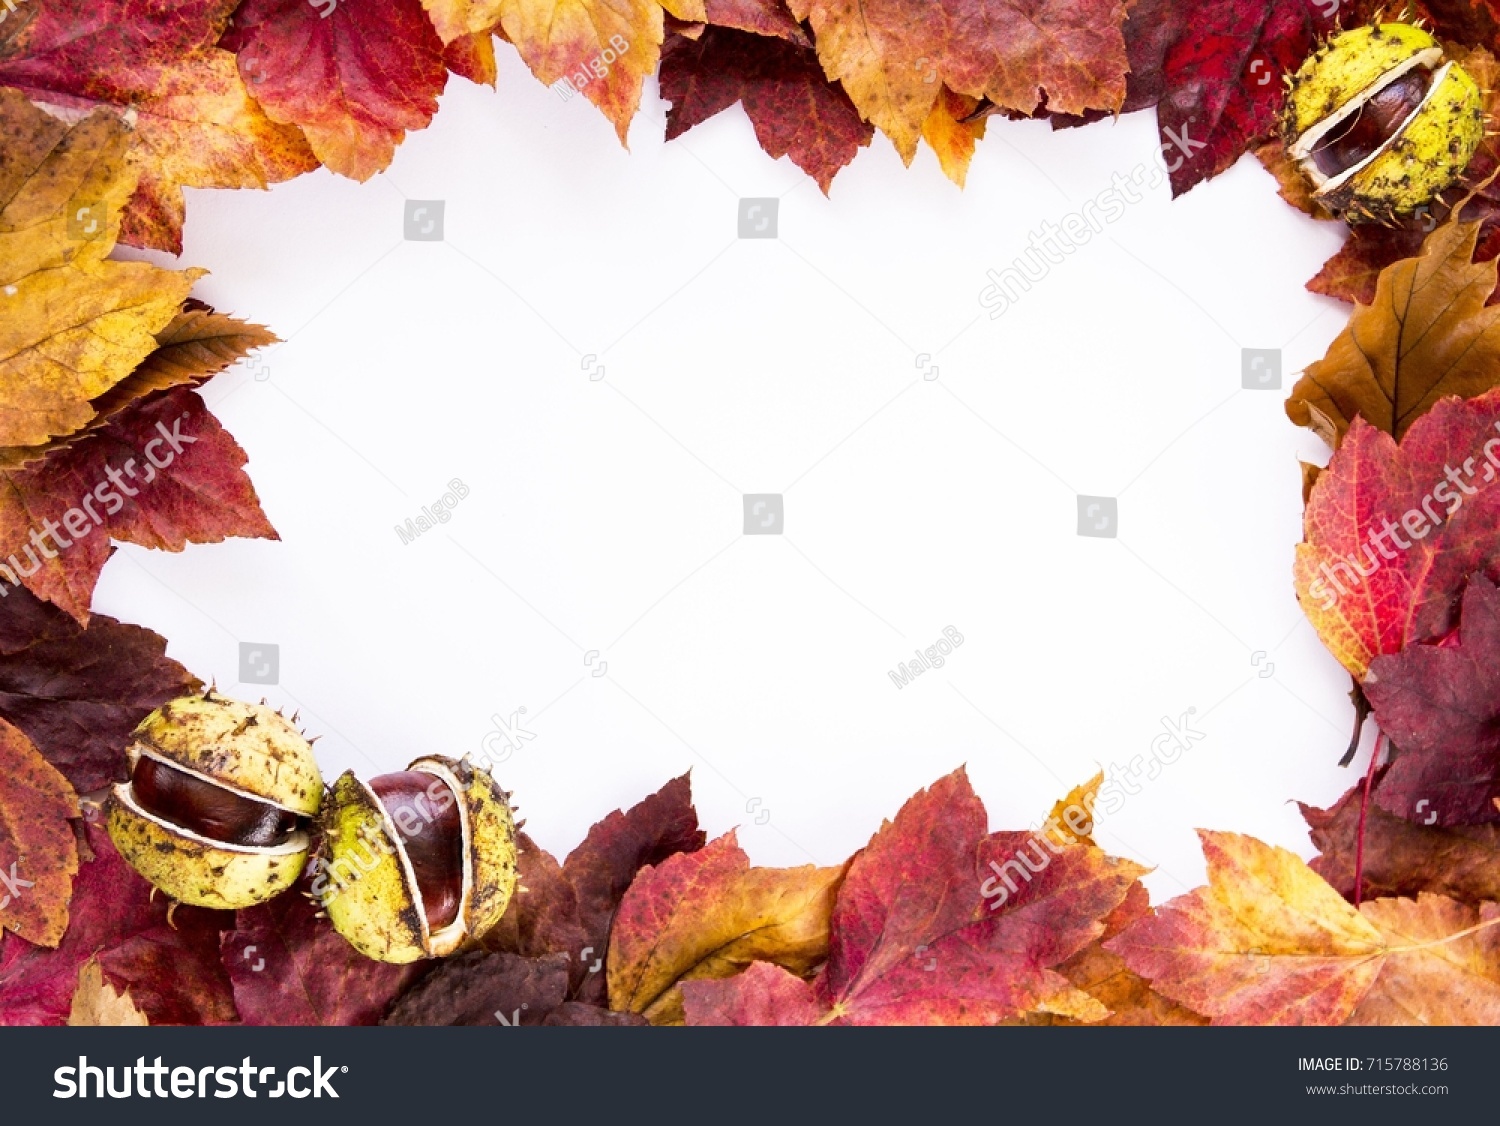 Close up photo of frame made of passel dry autumn fall foliage in warm colors three conkers,(chestnuts, buckeyes) recumbent on white background #715788136